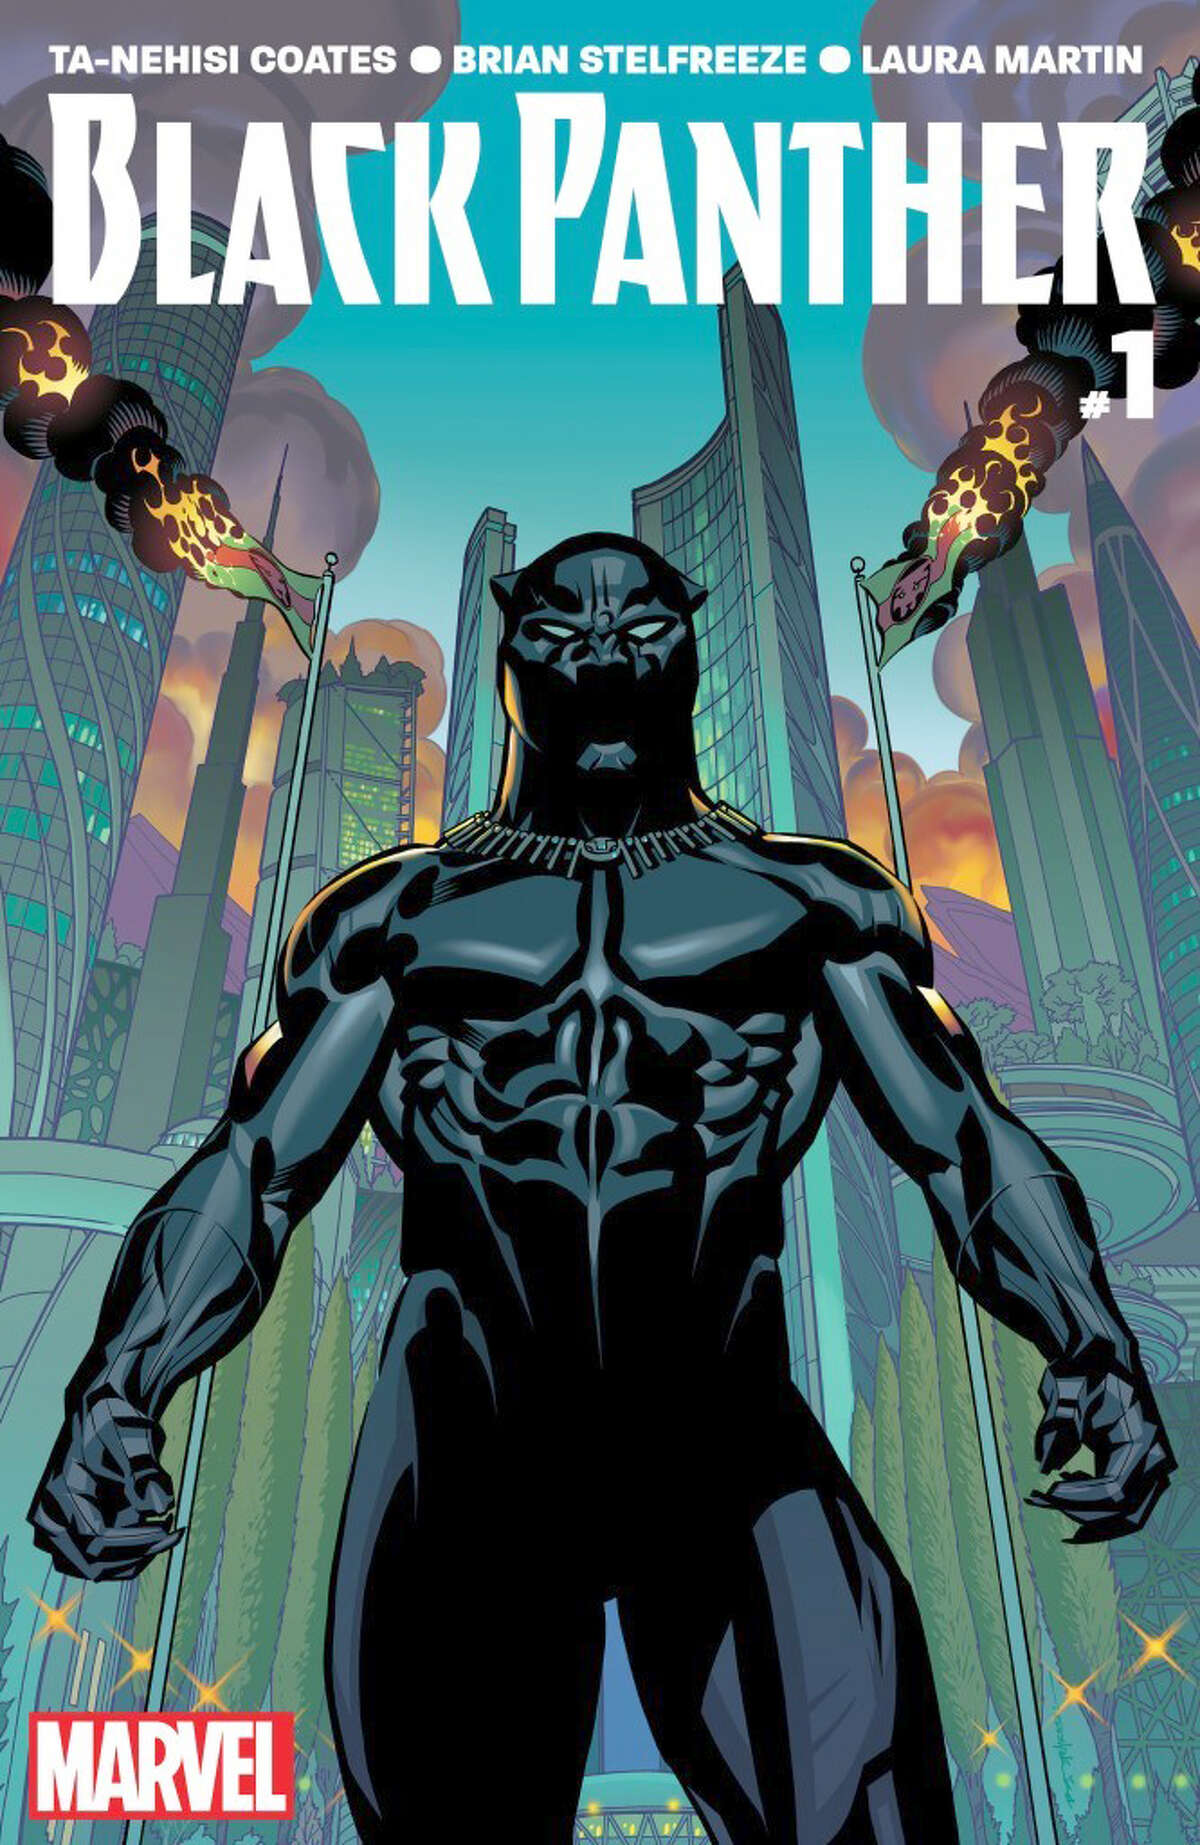 Black Panther #1 The cover. Written by Ta-Nehisi Coates with art by Brian Stelfreeze. 